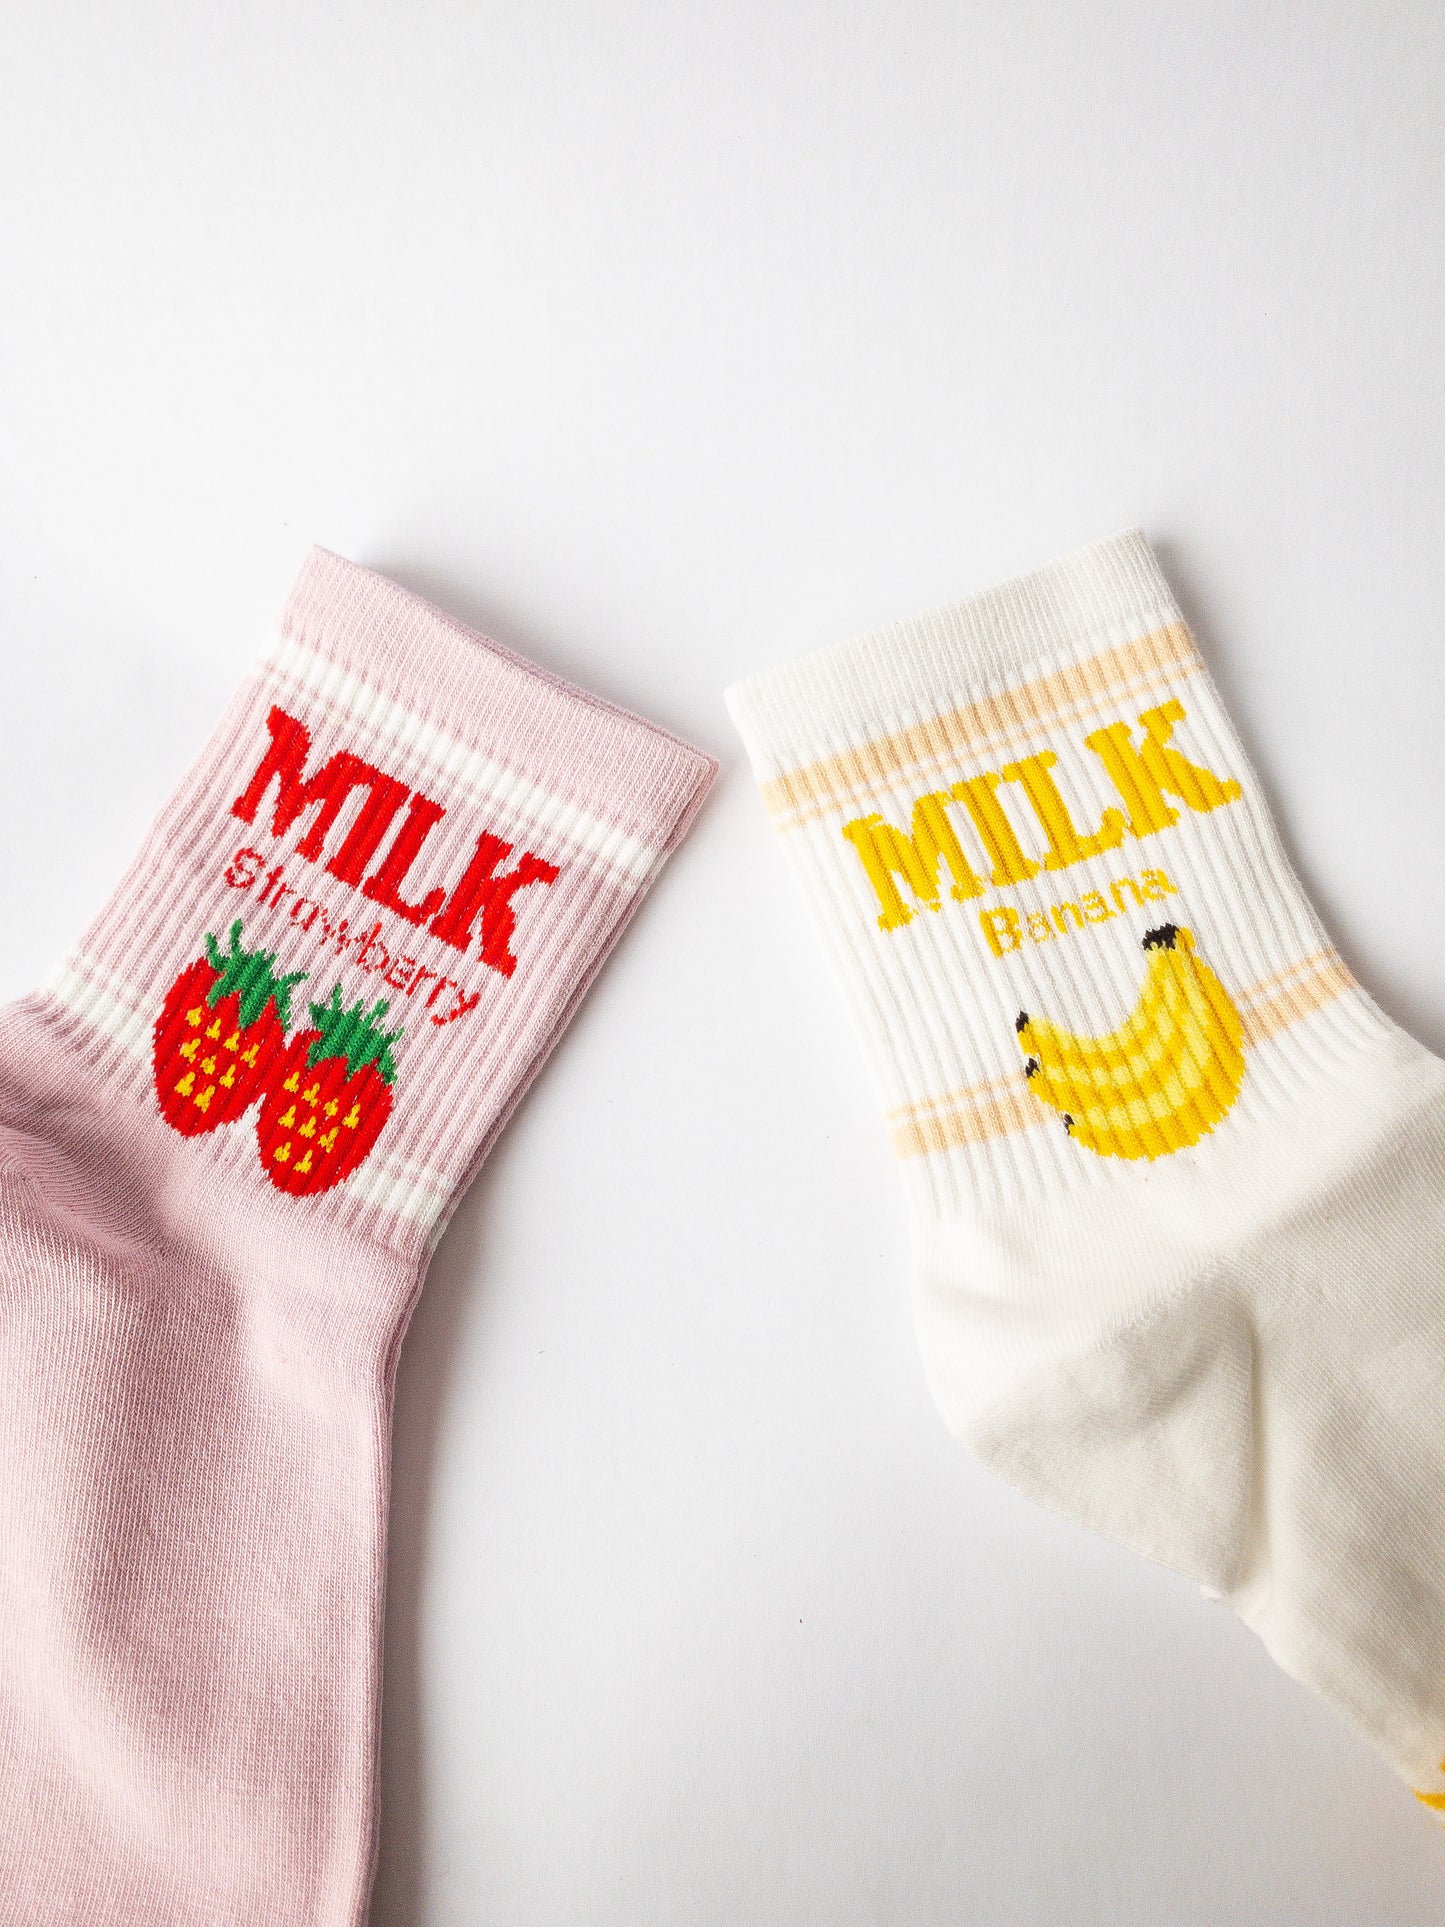 The most delicious duo of fruit flavored milks! A pink strawberry milk pair and a white banana milk pair. Adult size 4-10 crew socks come up above the ankle.